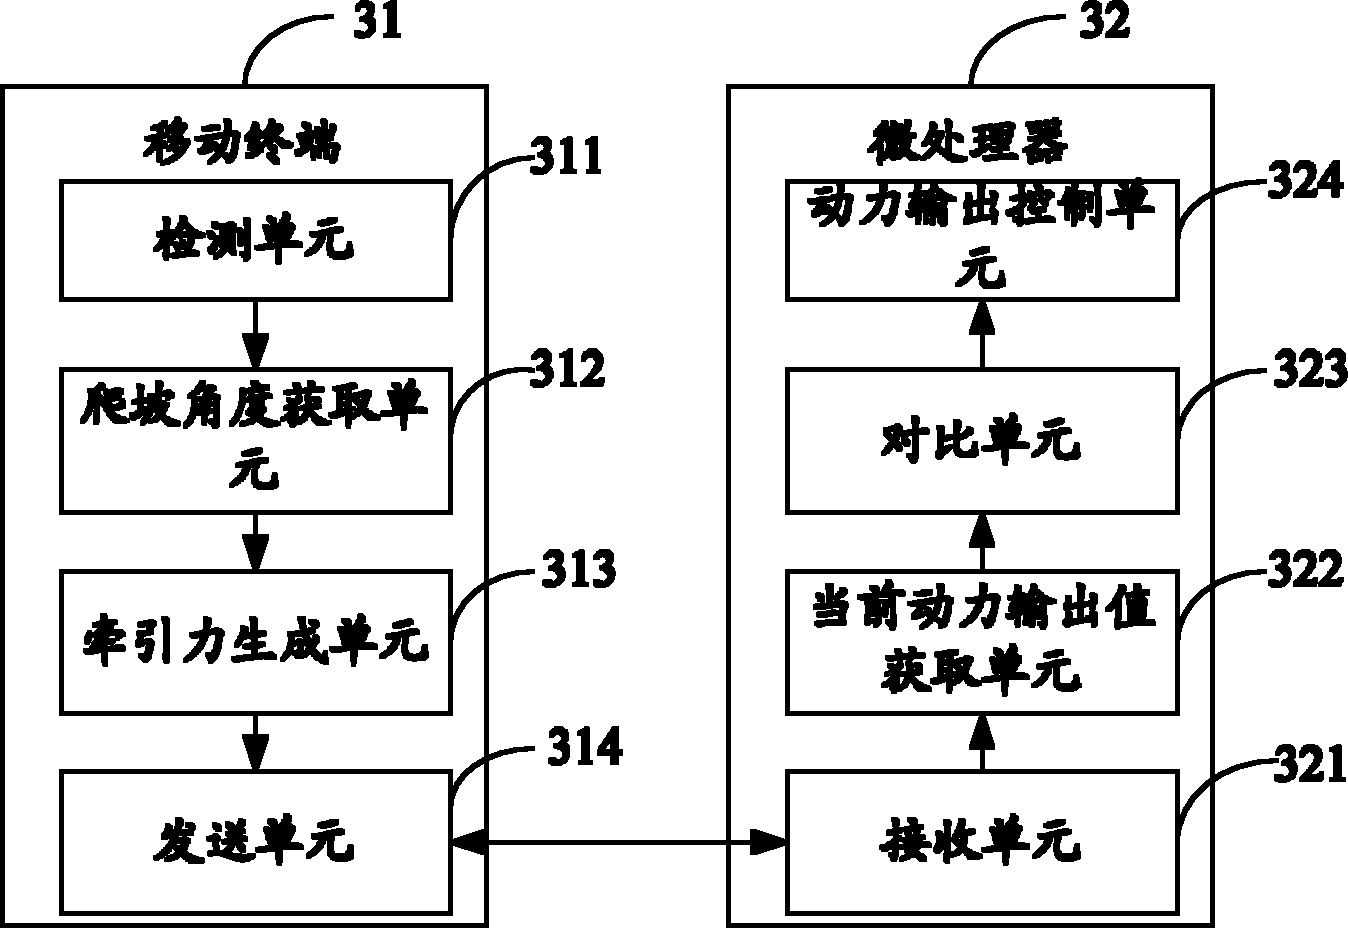 System and method for controlling traveling of automobile by mobile terminal